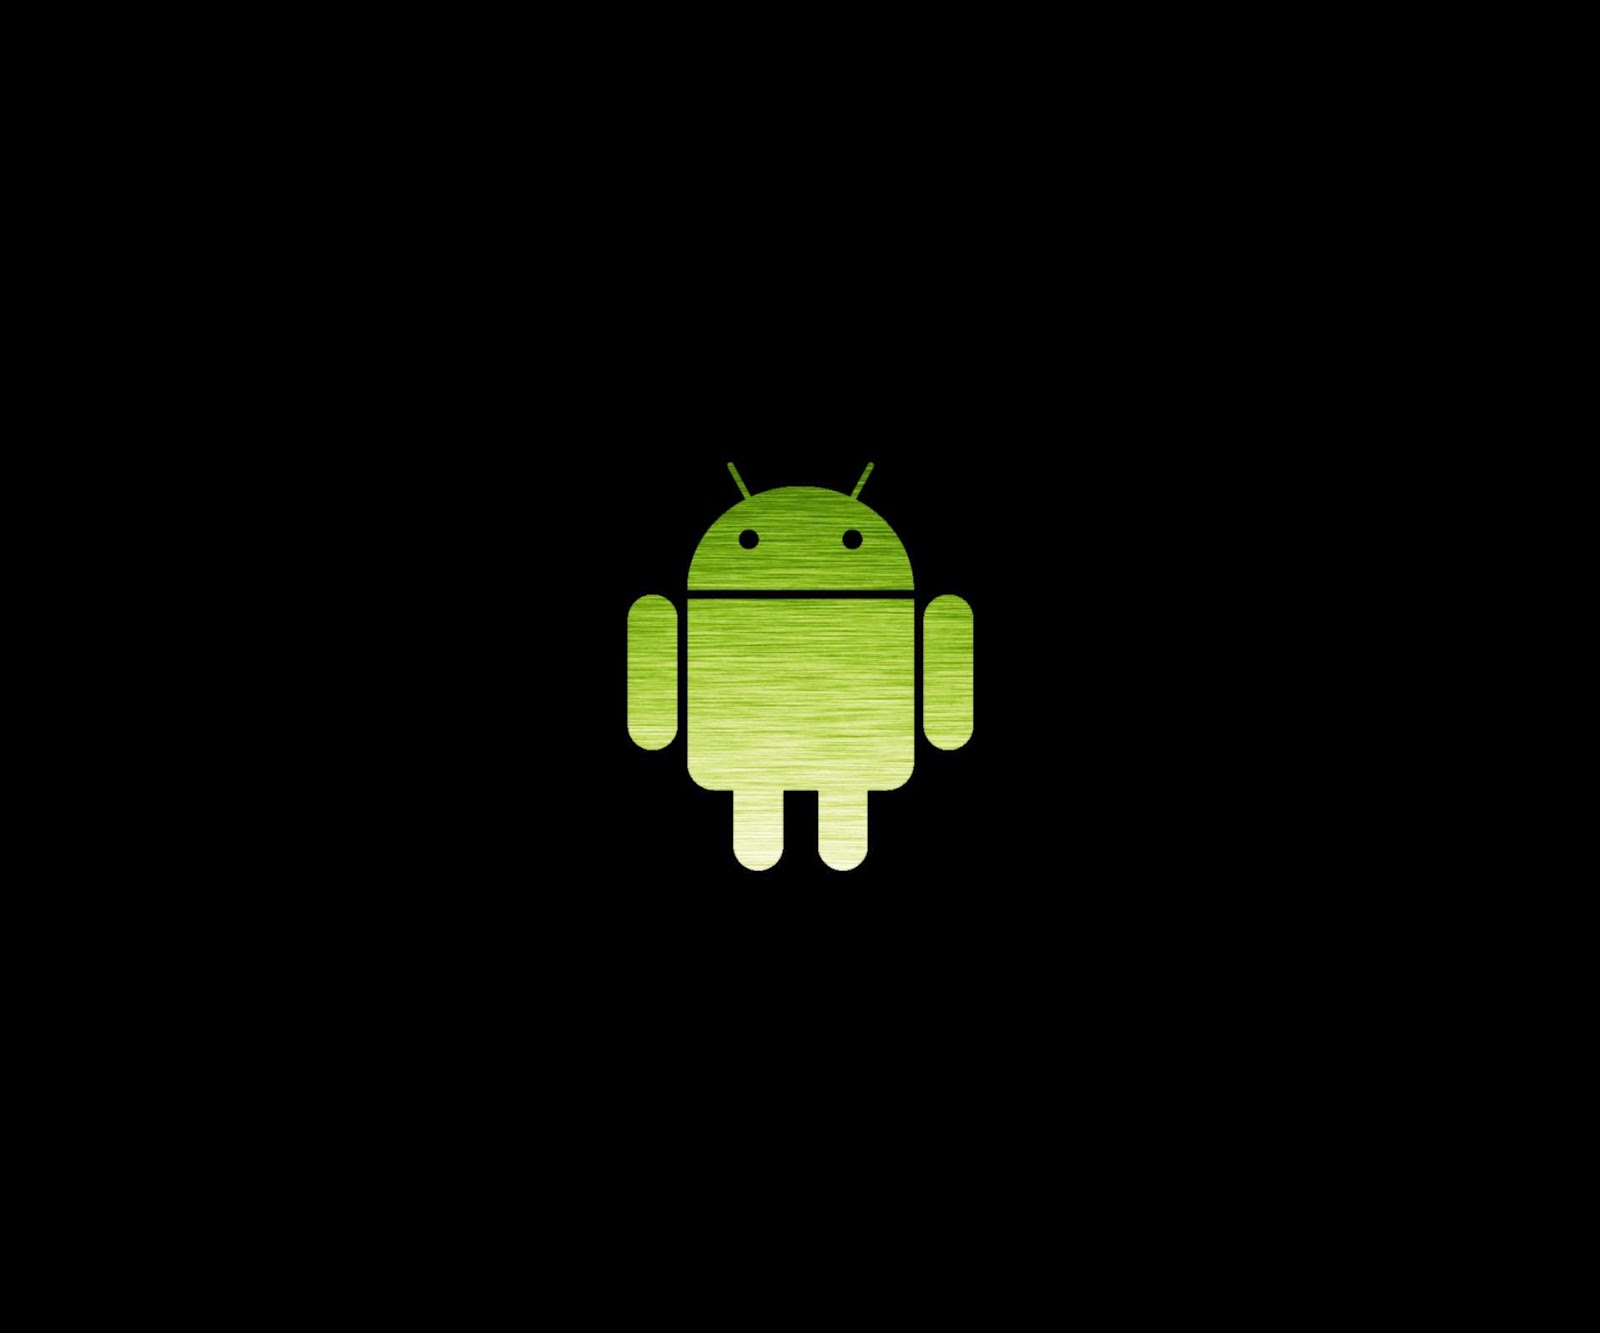 Download Wallpaper Android Black Free | Go Android One ...